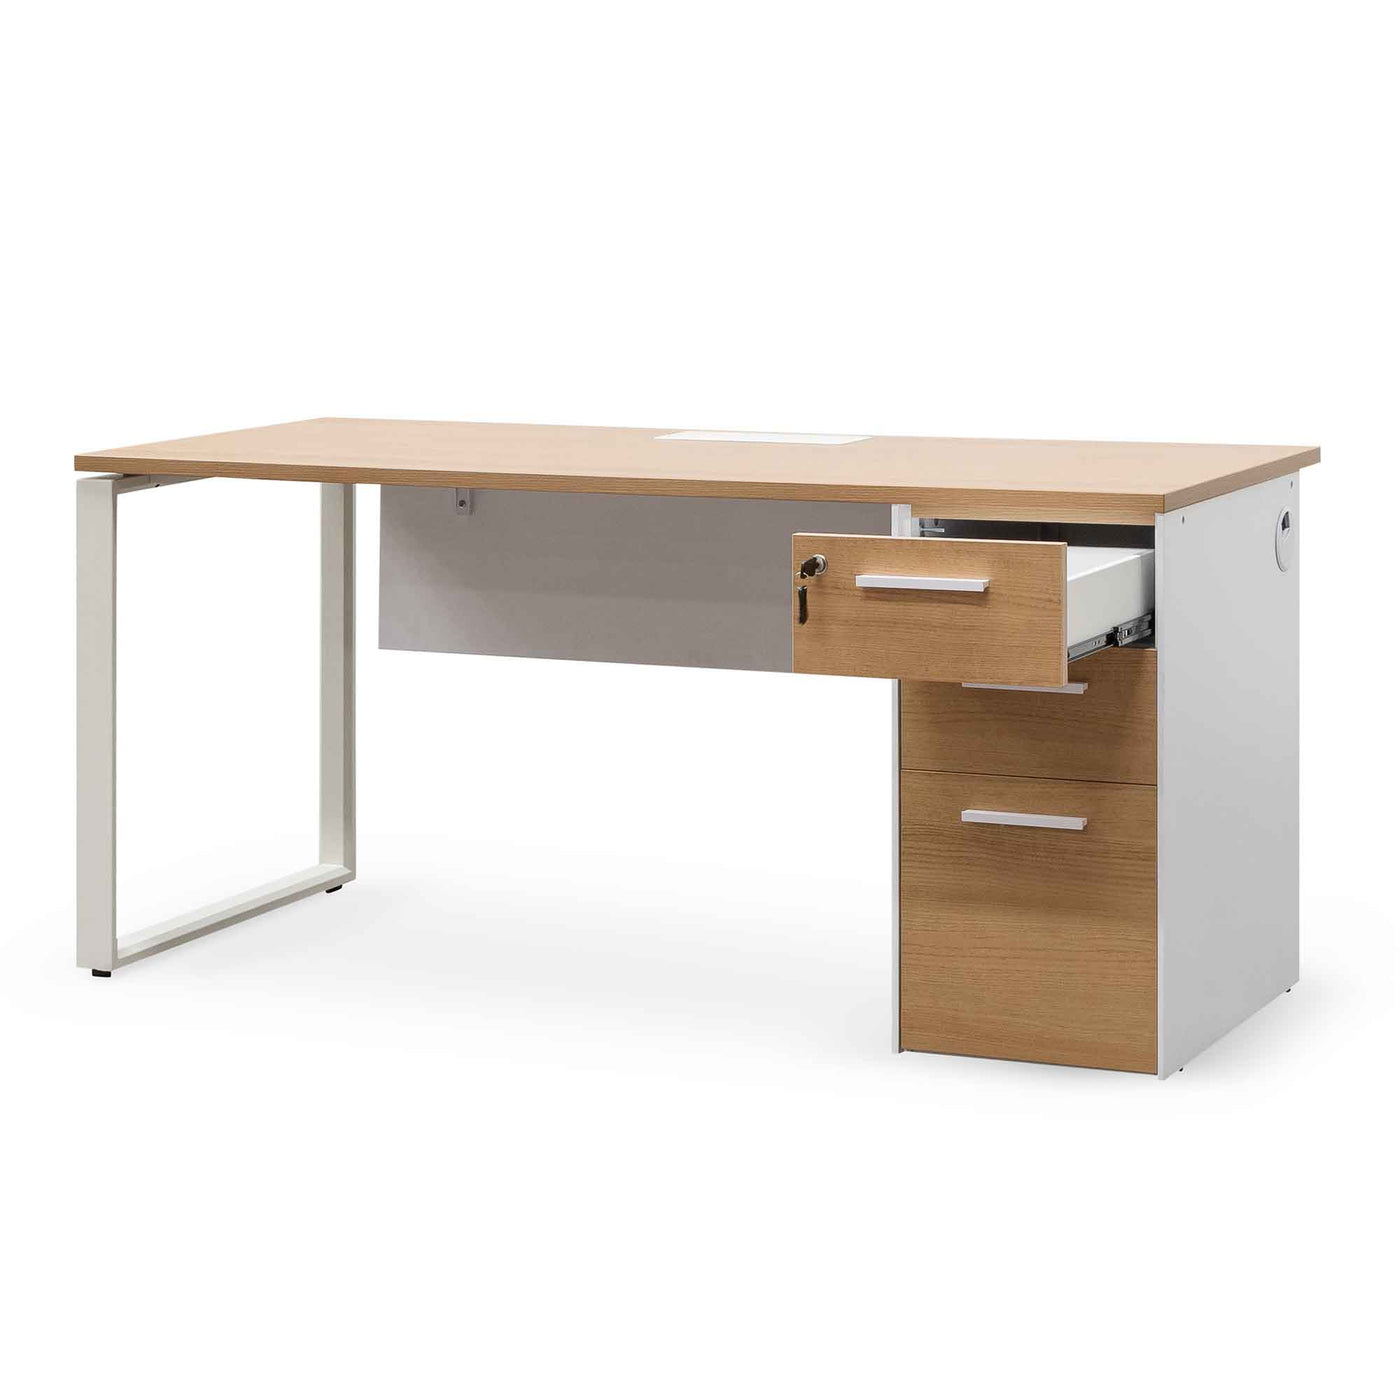 1 Seater Office Desk - Natural and White